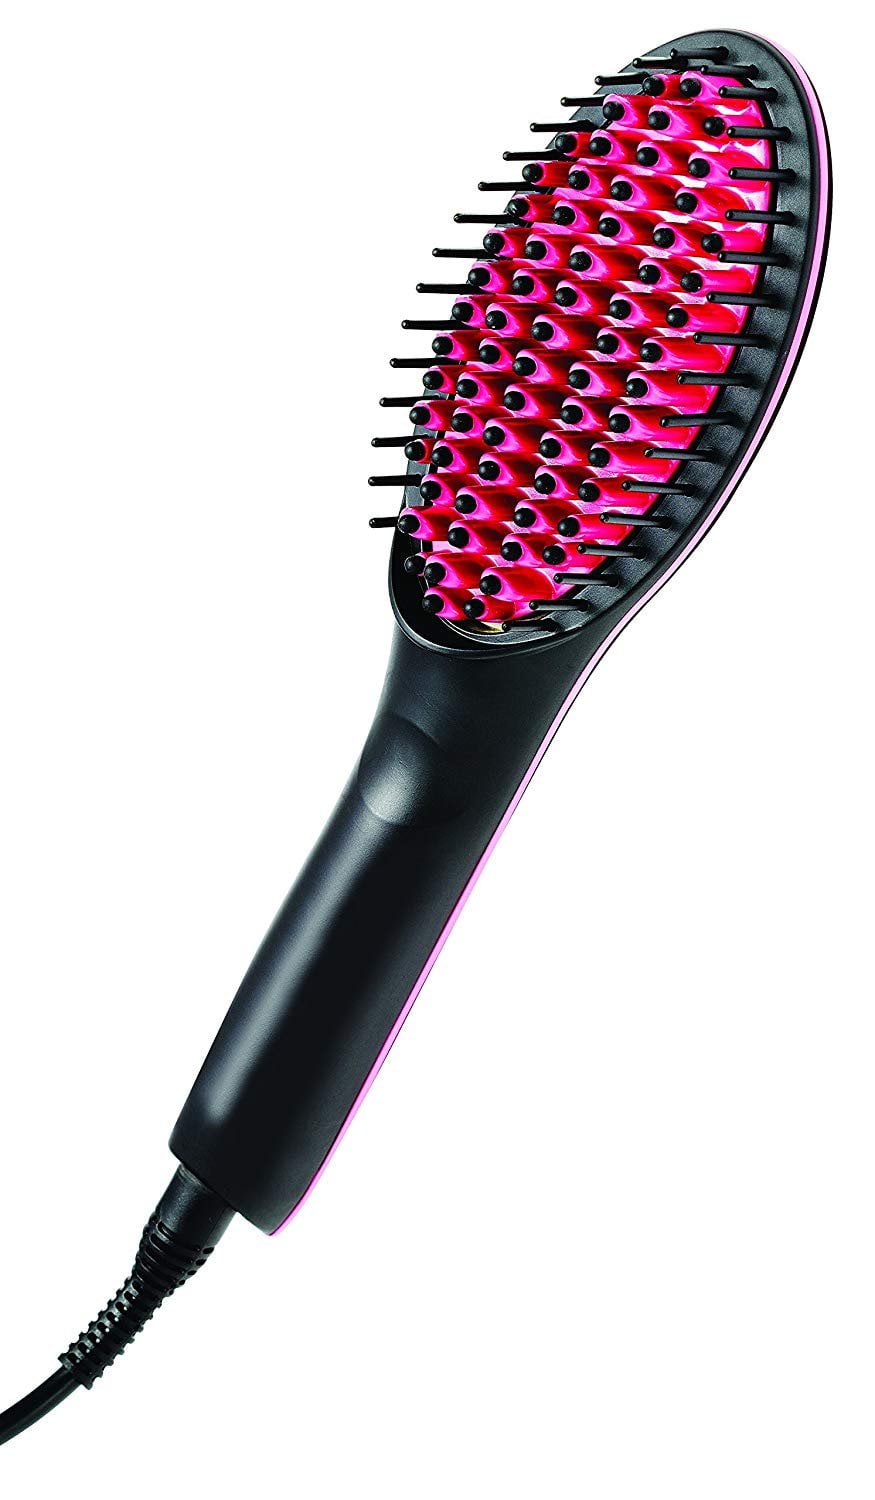 Qiuesikl 2023 New Negative Ion Hair Straightener Styling Comb with 5 Temp  34W 10s Fast Heating 2 in 1 Hair Straightener Brush and Curler Green   Walmartcom